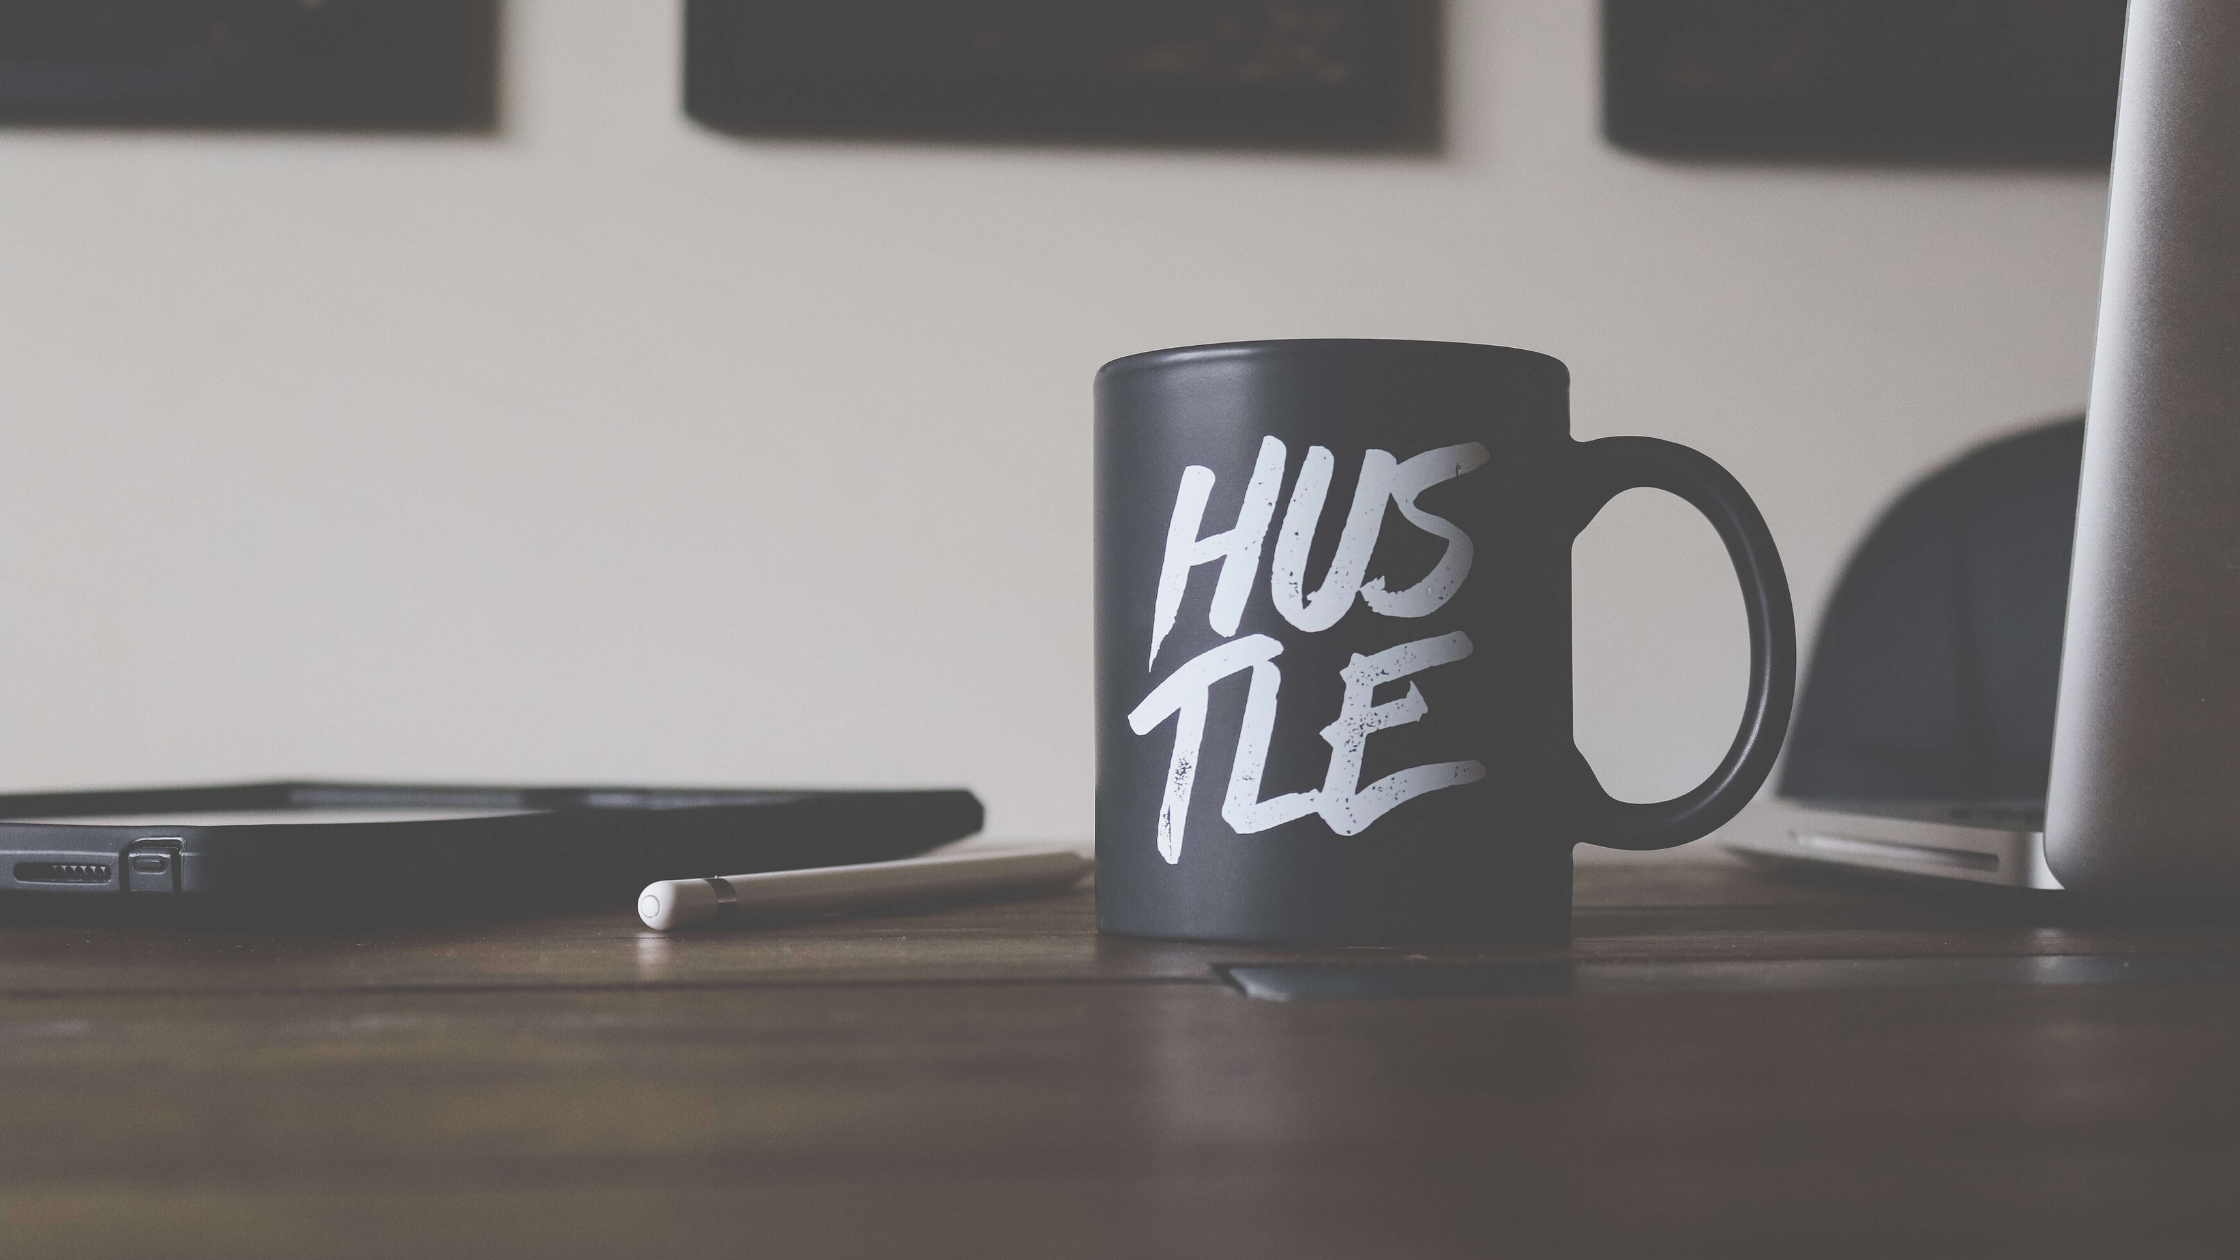 A black mug that says "HUSTLE" in white capital letters sitting on a desk